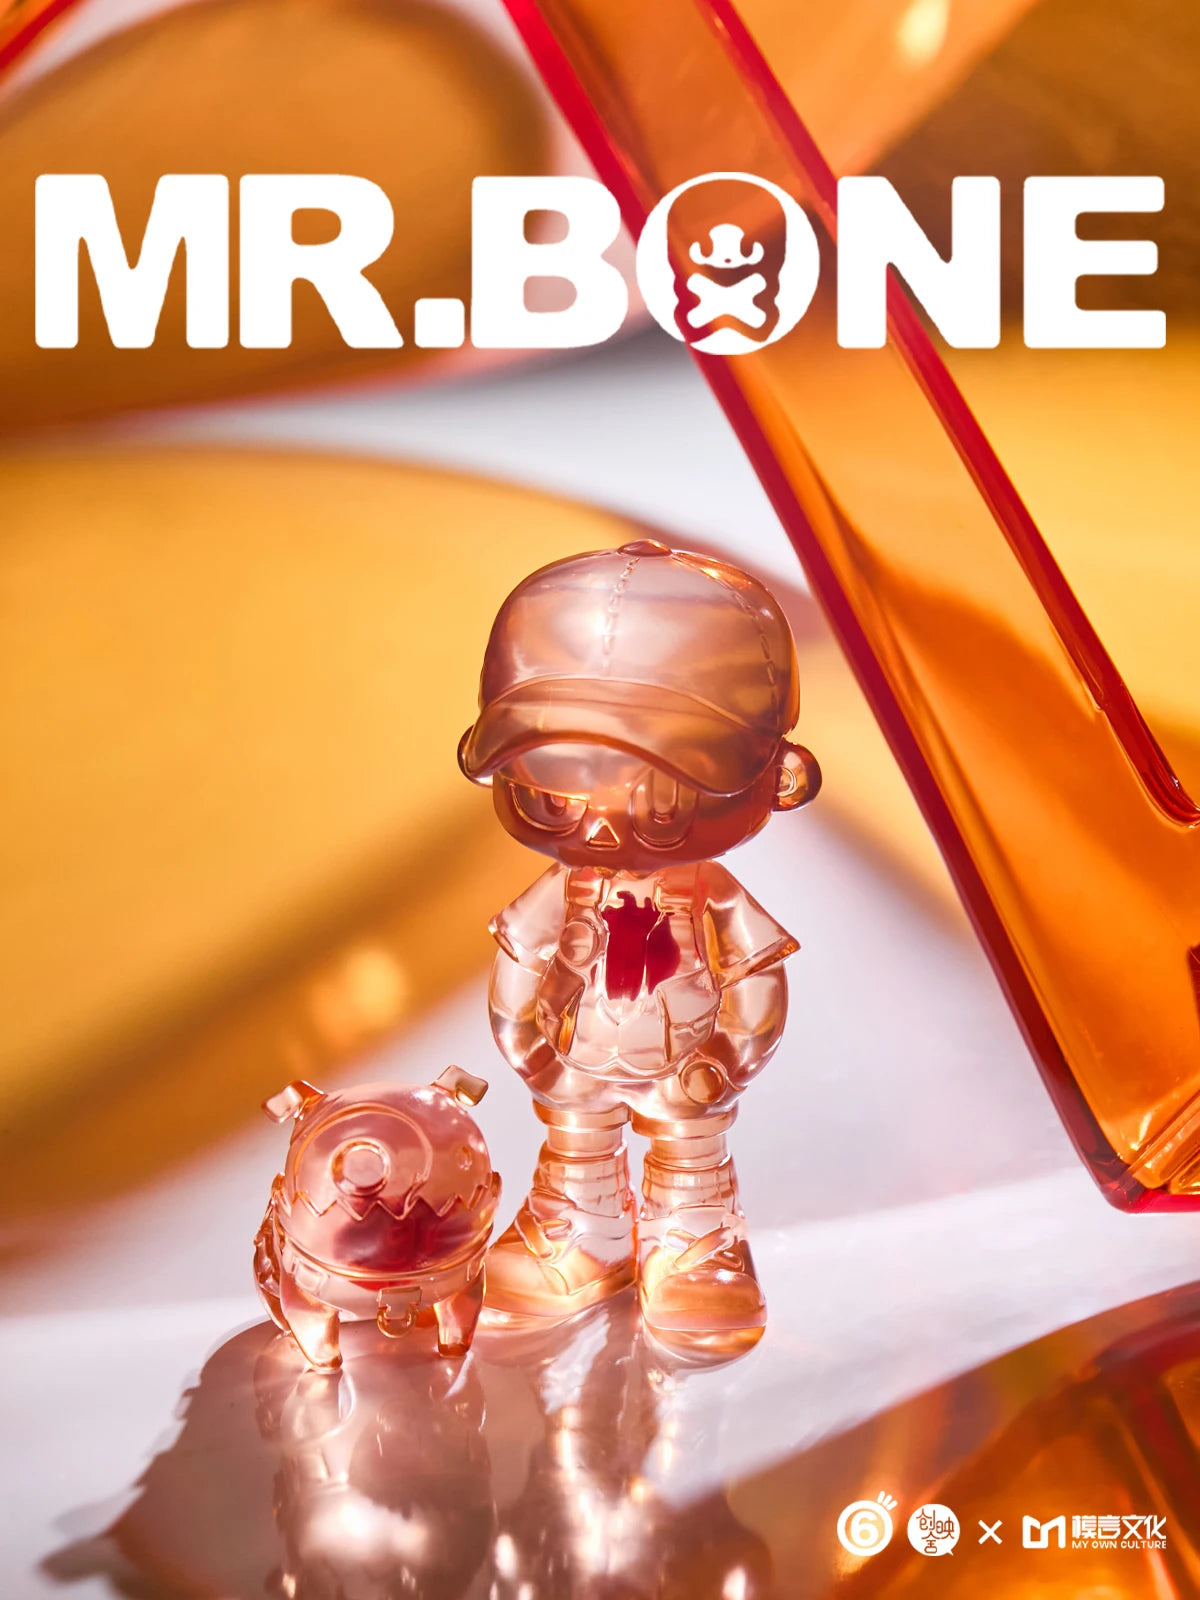 A blind box toy from Strangecat Toys: MR.BONE Grylls - Heart Beat. Resin figurine, 12cm, limited edition. Plastic toy with a hat, man, dog, and skull logo.